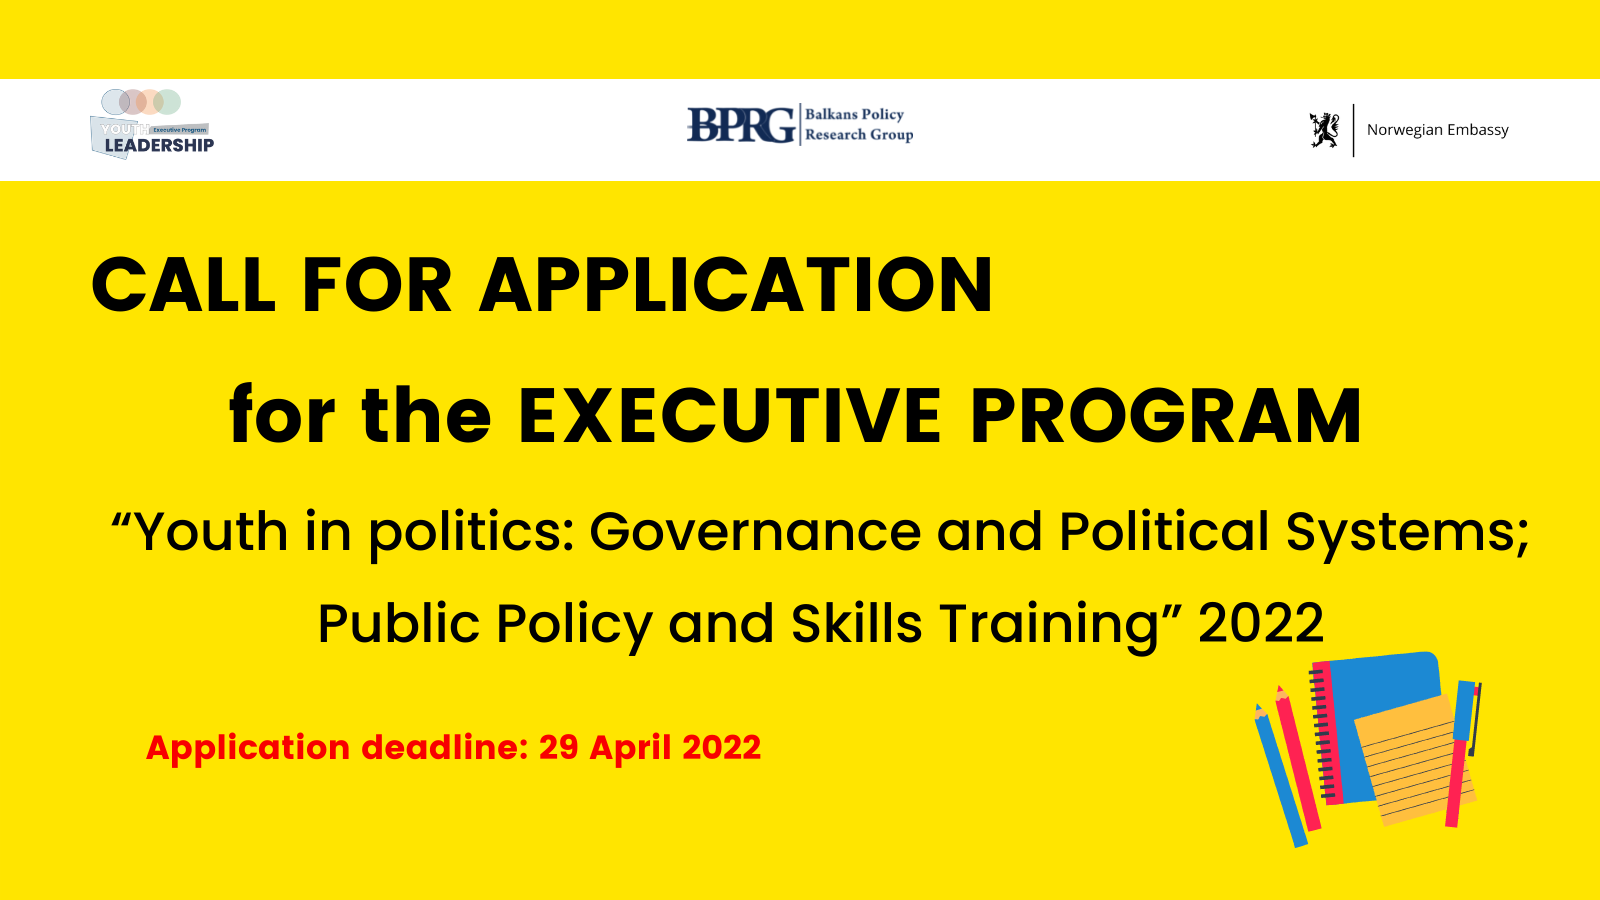 Invitation to apply to the Executive Program “Youth in Politics: Governance and Political Systems; Public Policy and Skills Training ”2022